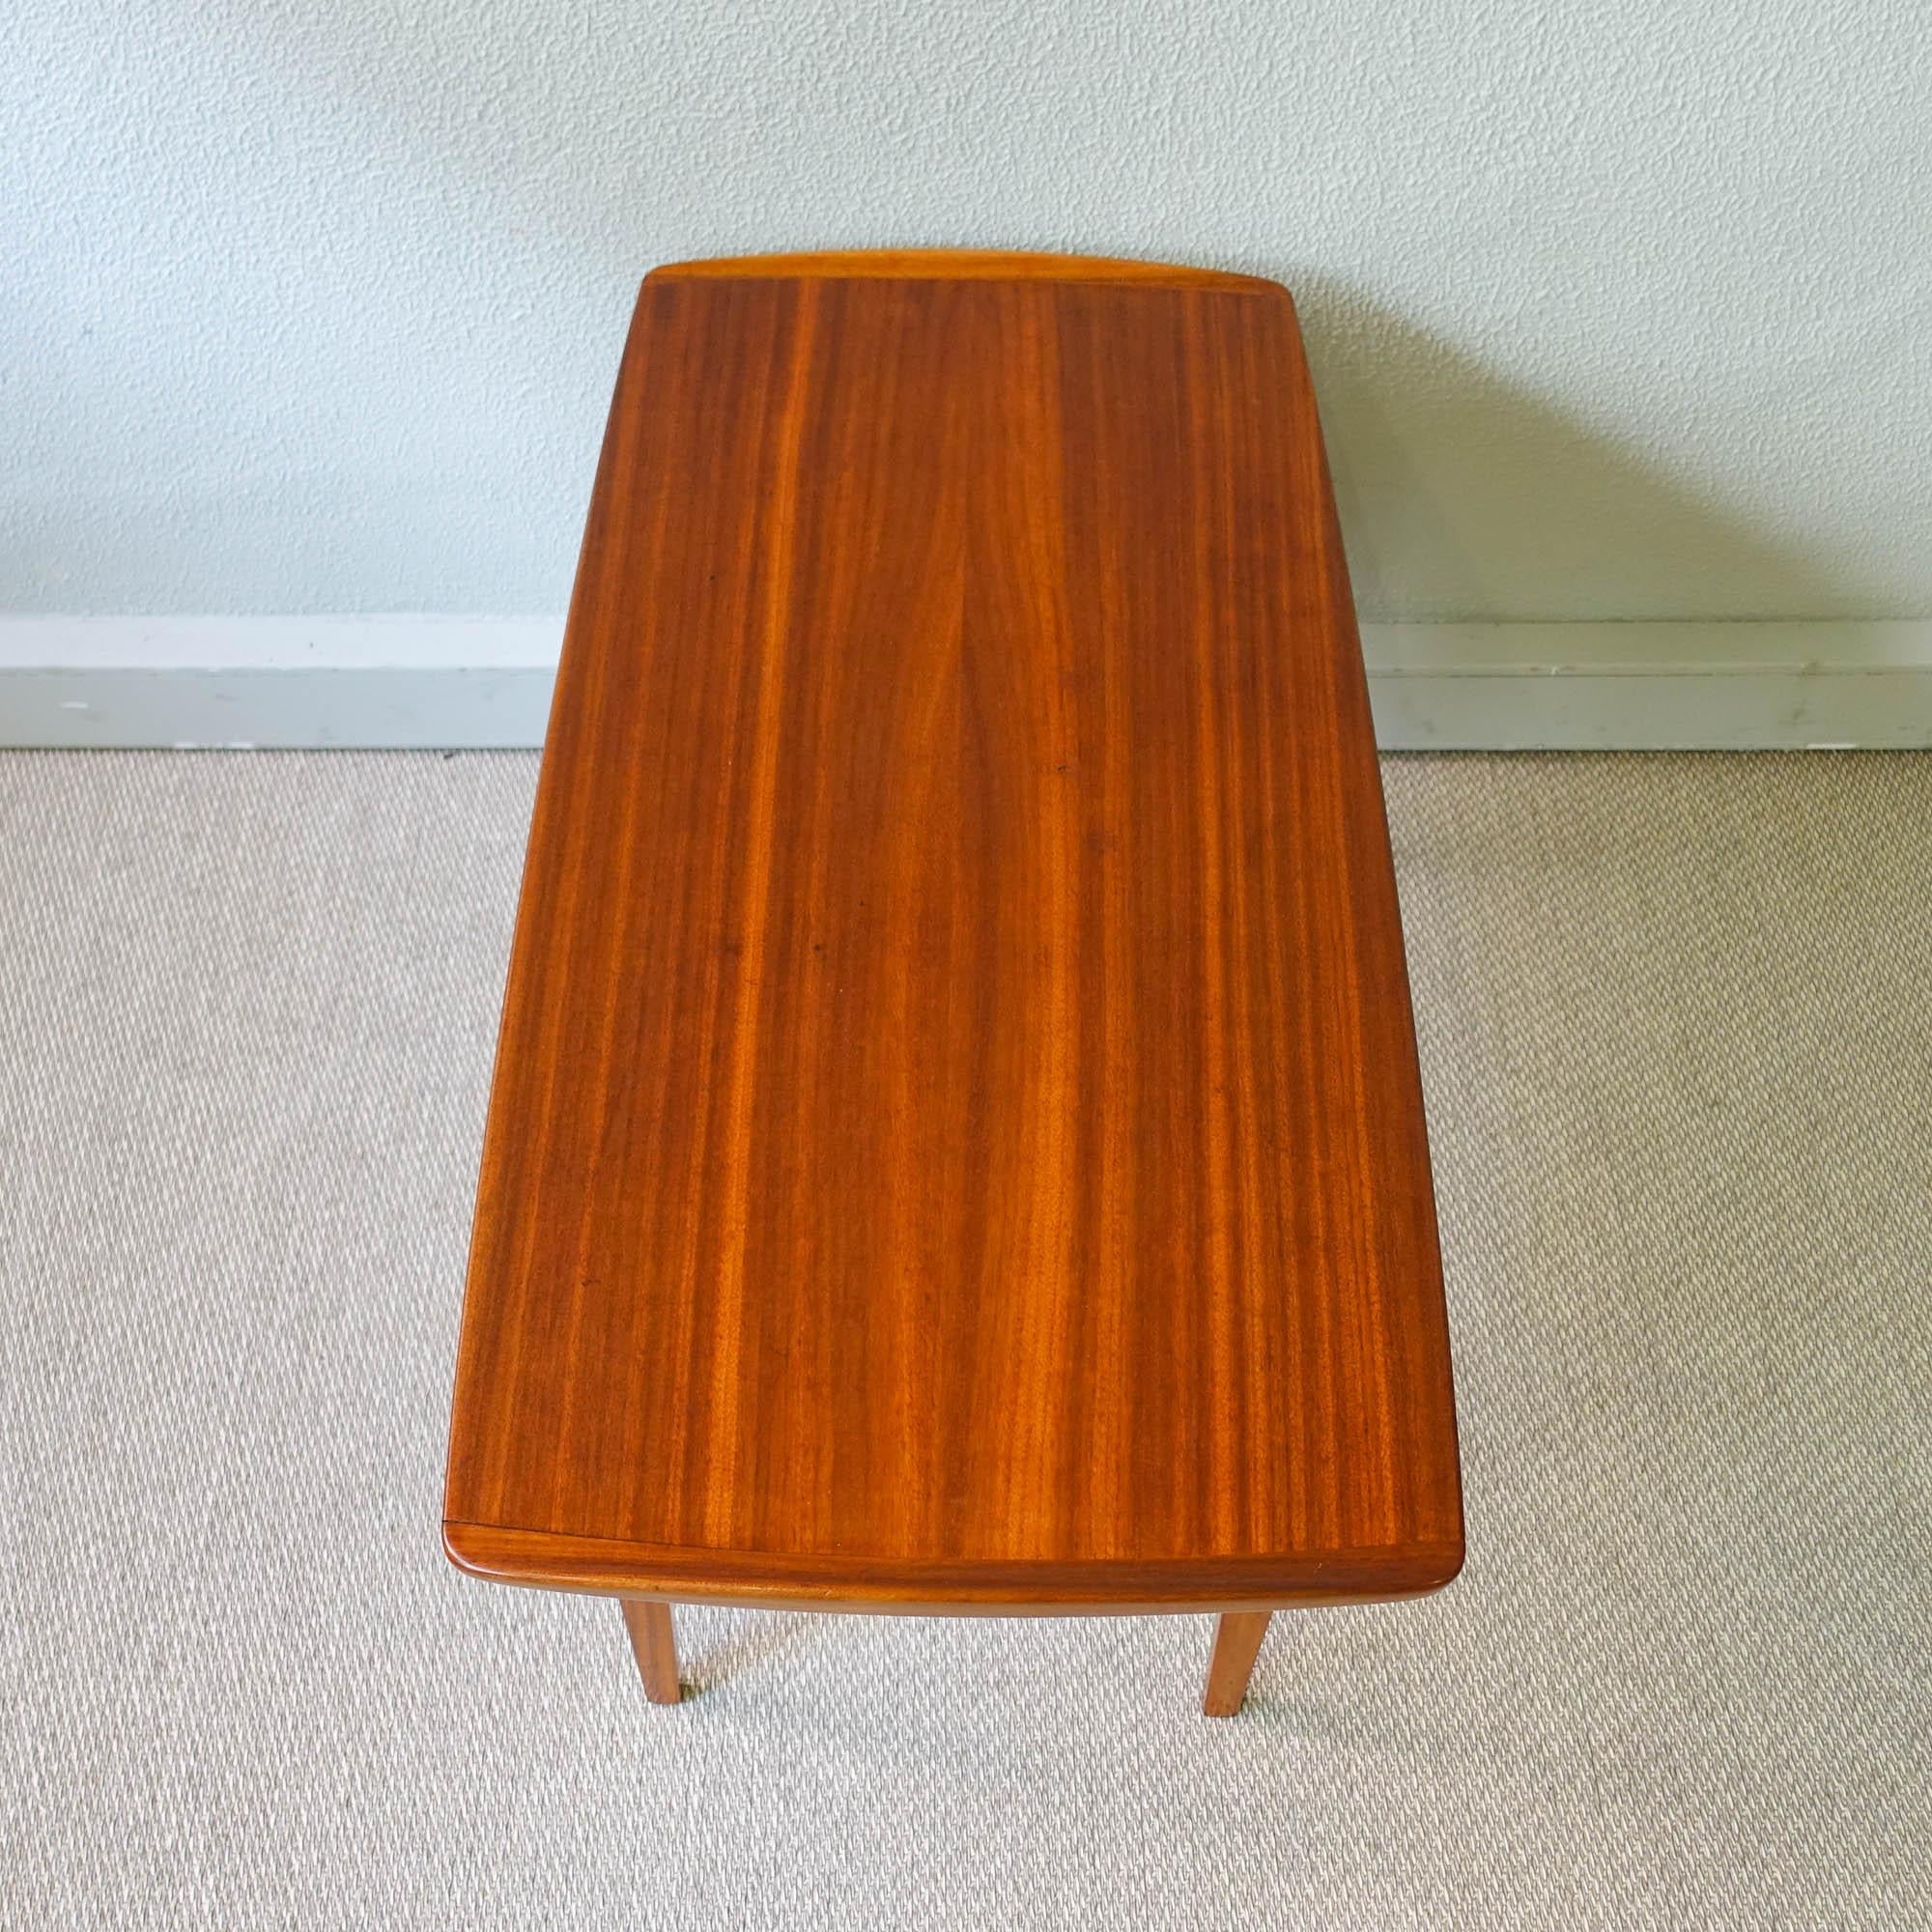 Portuguese Coffee Table, Model Excelsior, by José Espinho for Olaio, 1962 For Sale